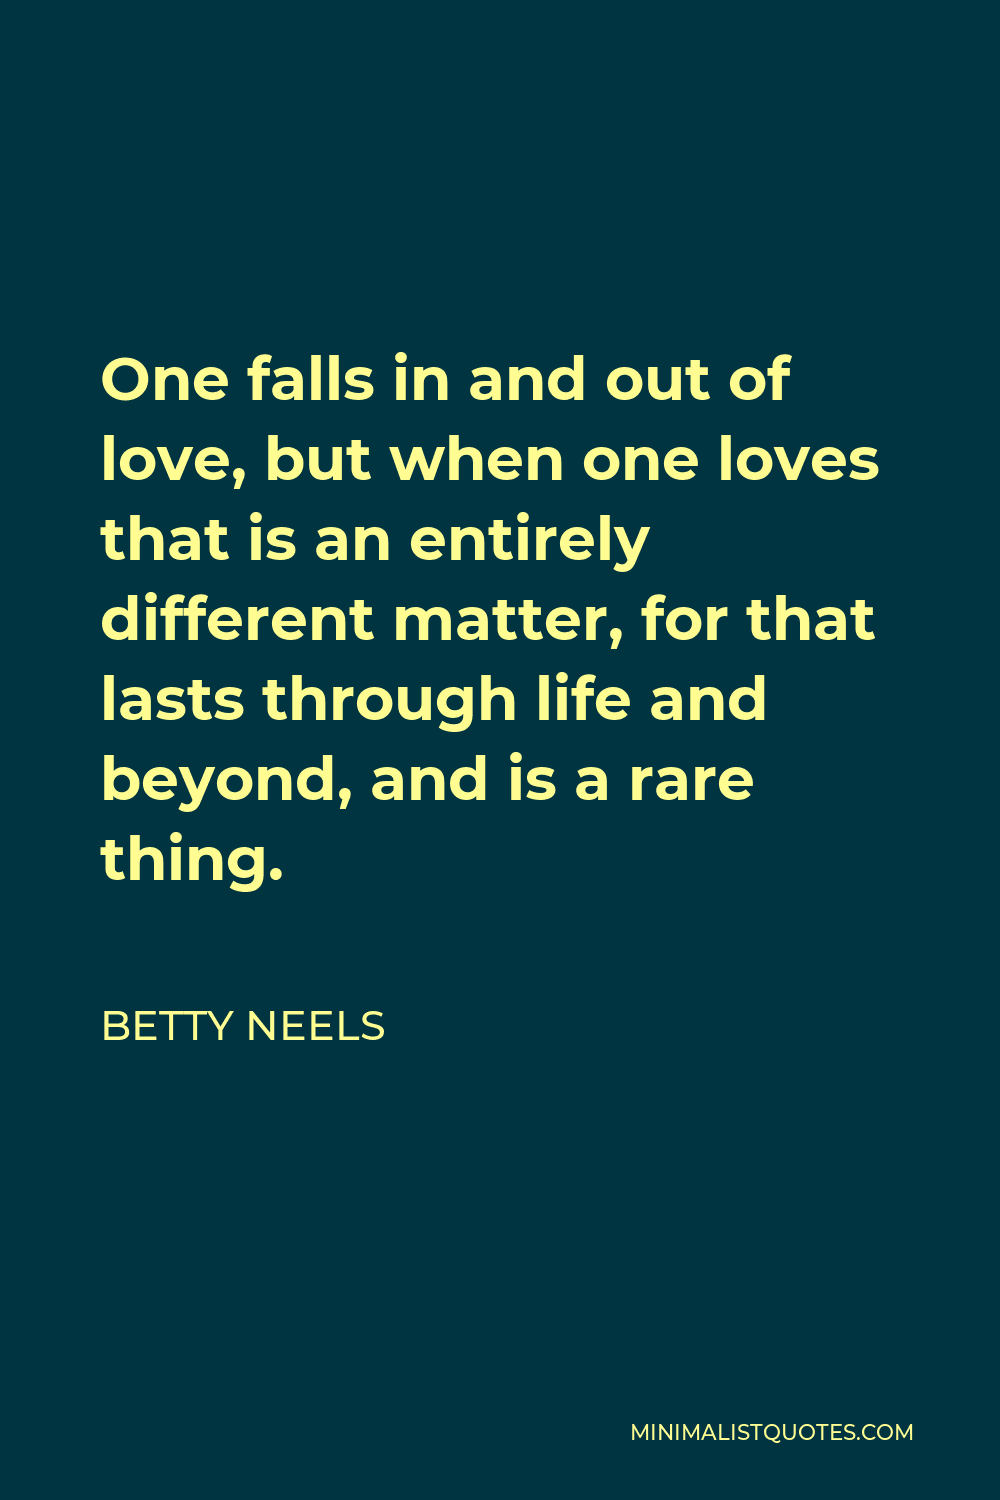 Betty Neels Quote - One falls in and out of love, but when one loves that is an entirely different matter, for that lasts through life and beyond, and is a rare thing.